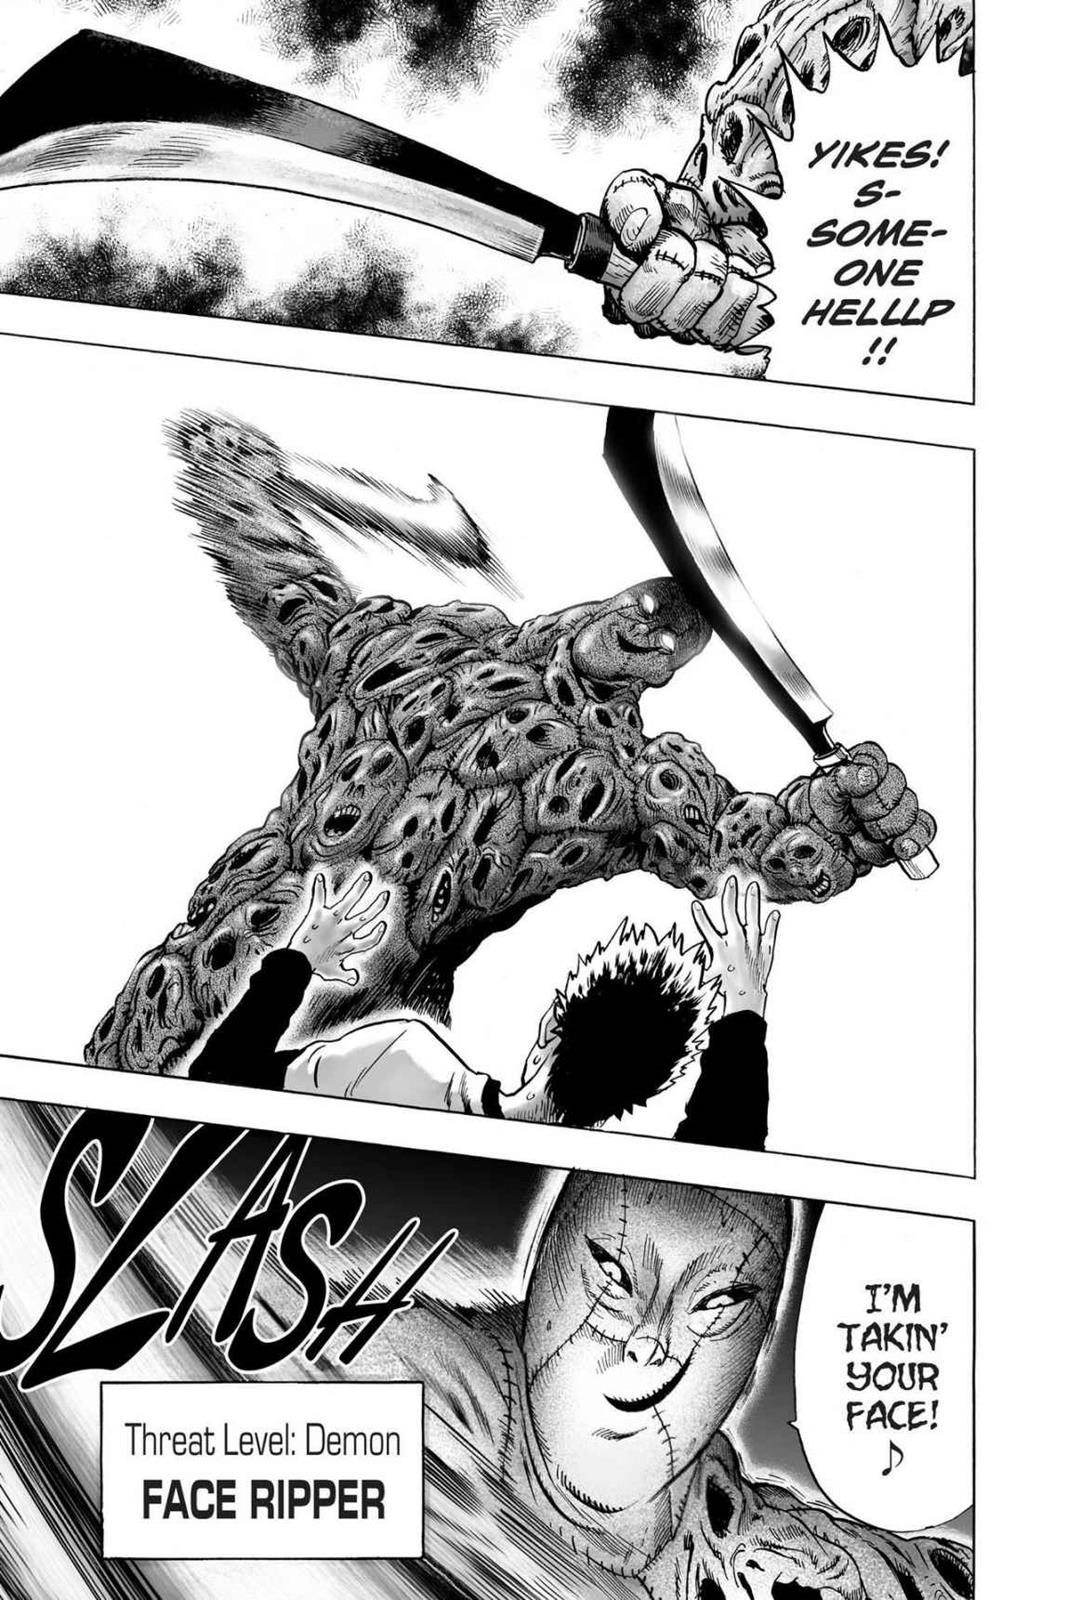 One-Punch Man, Punch 63 image 21